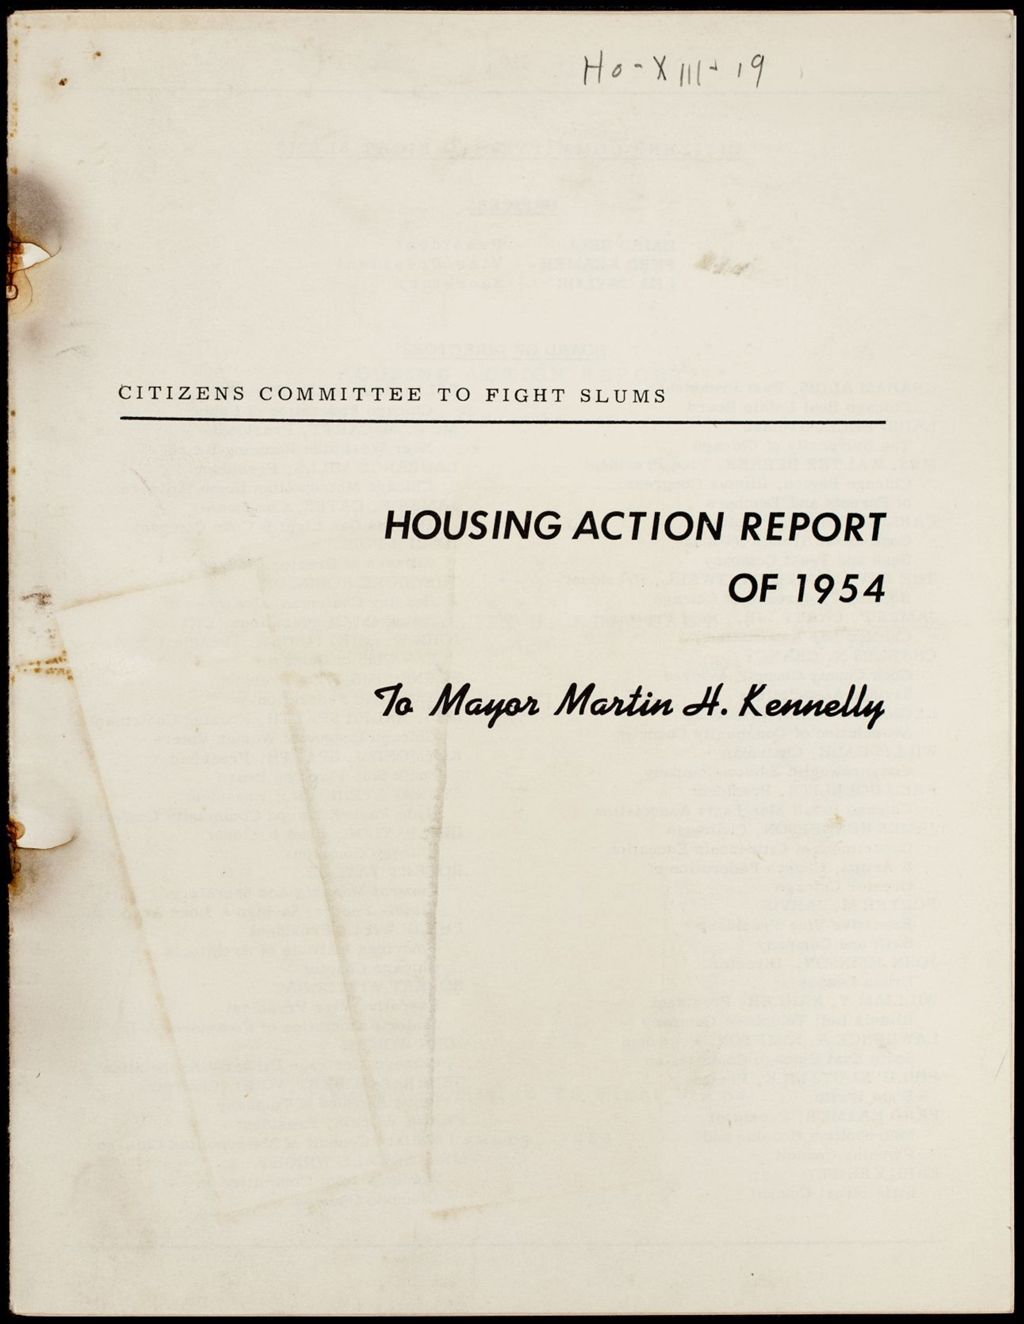 Miniature of Citizen's Committee to Fight Slums Housing Action Report, 1954 (Folder I-2750)